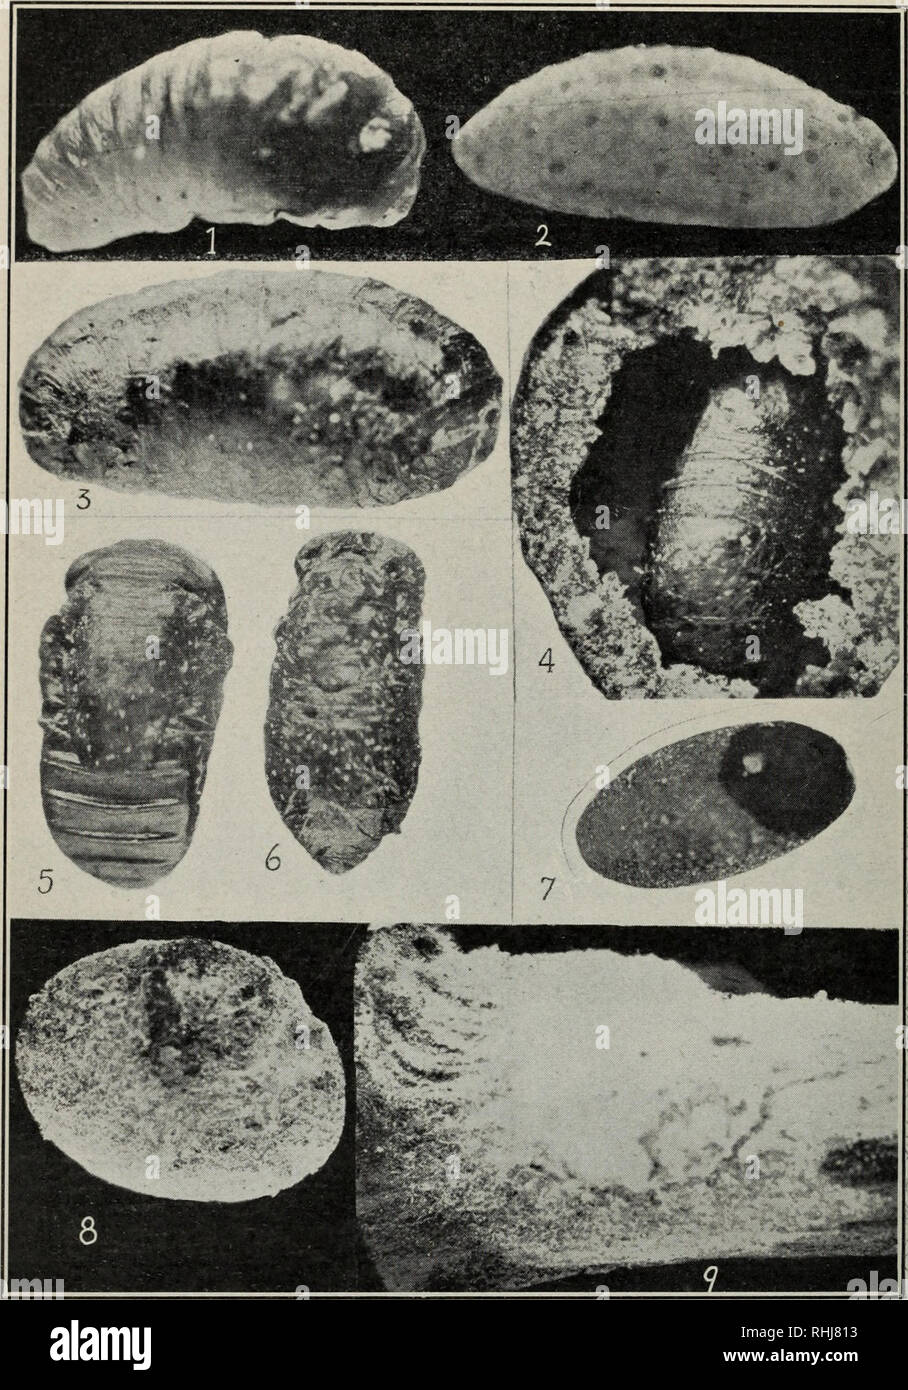 . The black scale. Scale insects. Plate VI. Larva of Scutellista parasite, Cerchysius sp. x25. Larva of Cerchysius partly changed to pupa. x25. Parasitized larva of Scutellista harboring Cerchysius within. x25. Appearance of parasitized Scutellista larva beneath scale. x25. Normal Scutellista pupa. x20. Parasitized Scutellista pupa or Scutellista larva which succeeded in partly changing to pupa. x20. Exit hole of parasite in old larval skin of Scutellista. Black scale killed by fungus, Isaria. Fungus covering scale and spreading over twig.. Please note that these images are extracted from scan Stock Photo